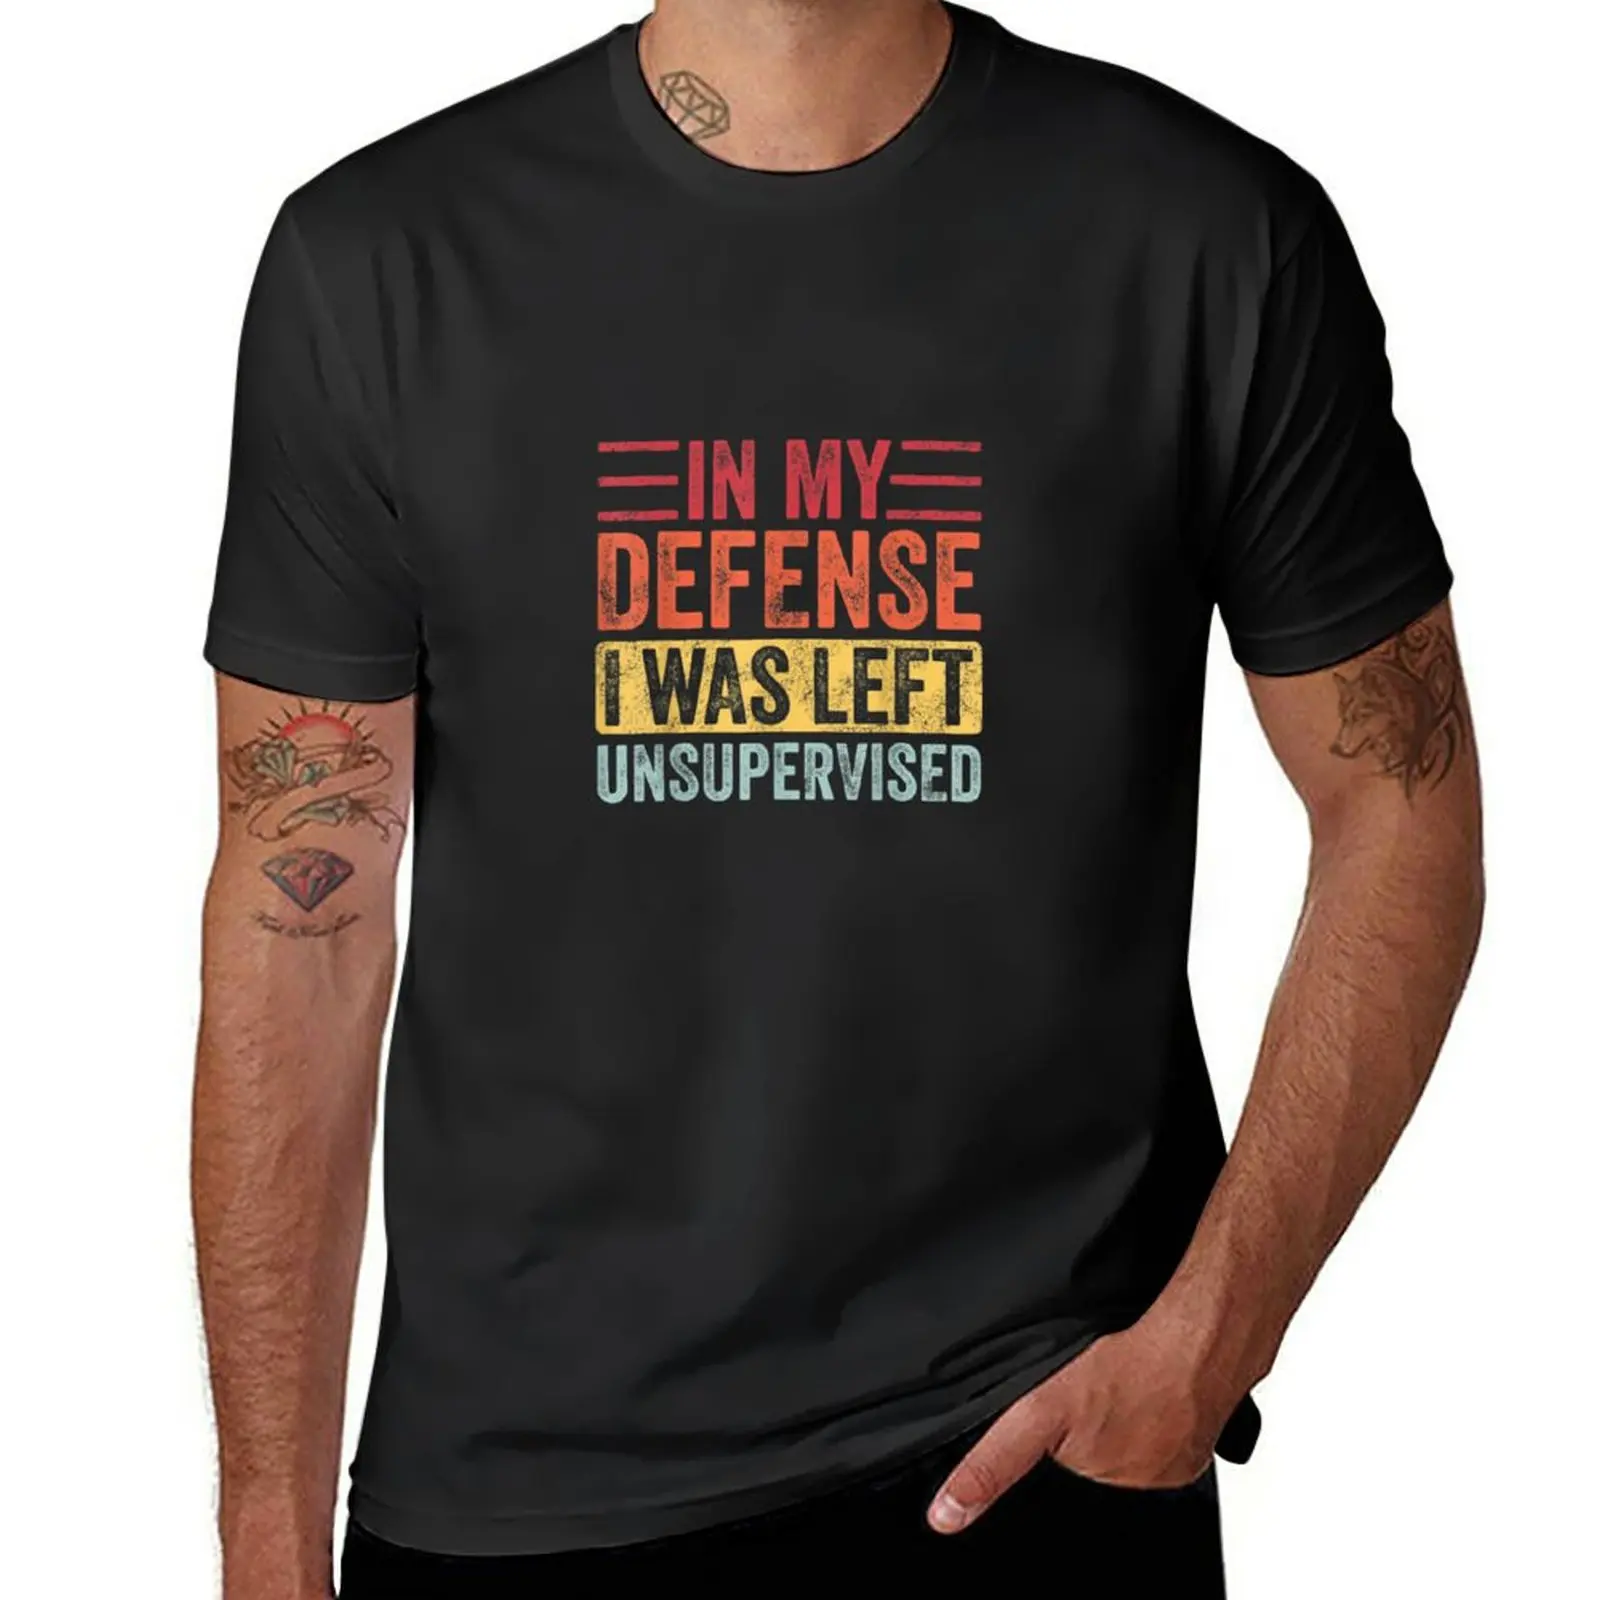 

New In my defense, I was left unsupervised T-Shirt custom t shirts cute clothes tees workout shirts for men